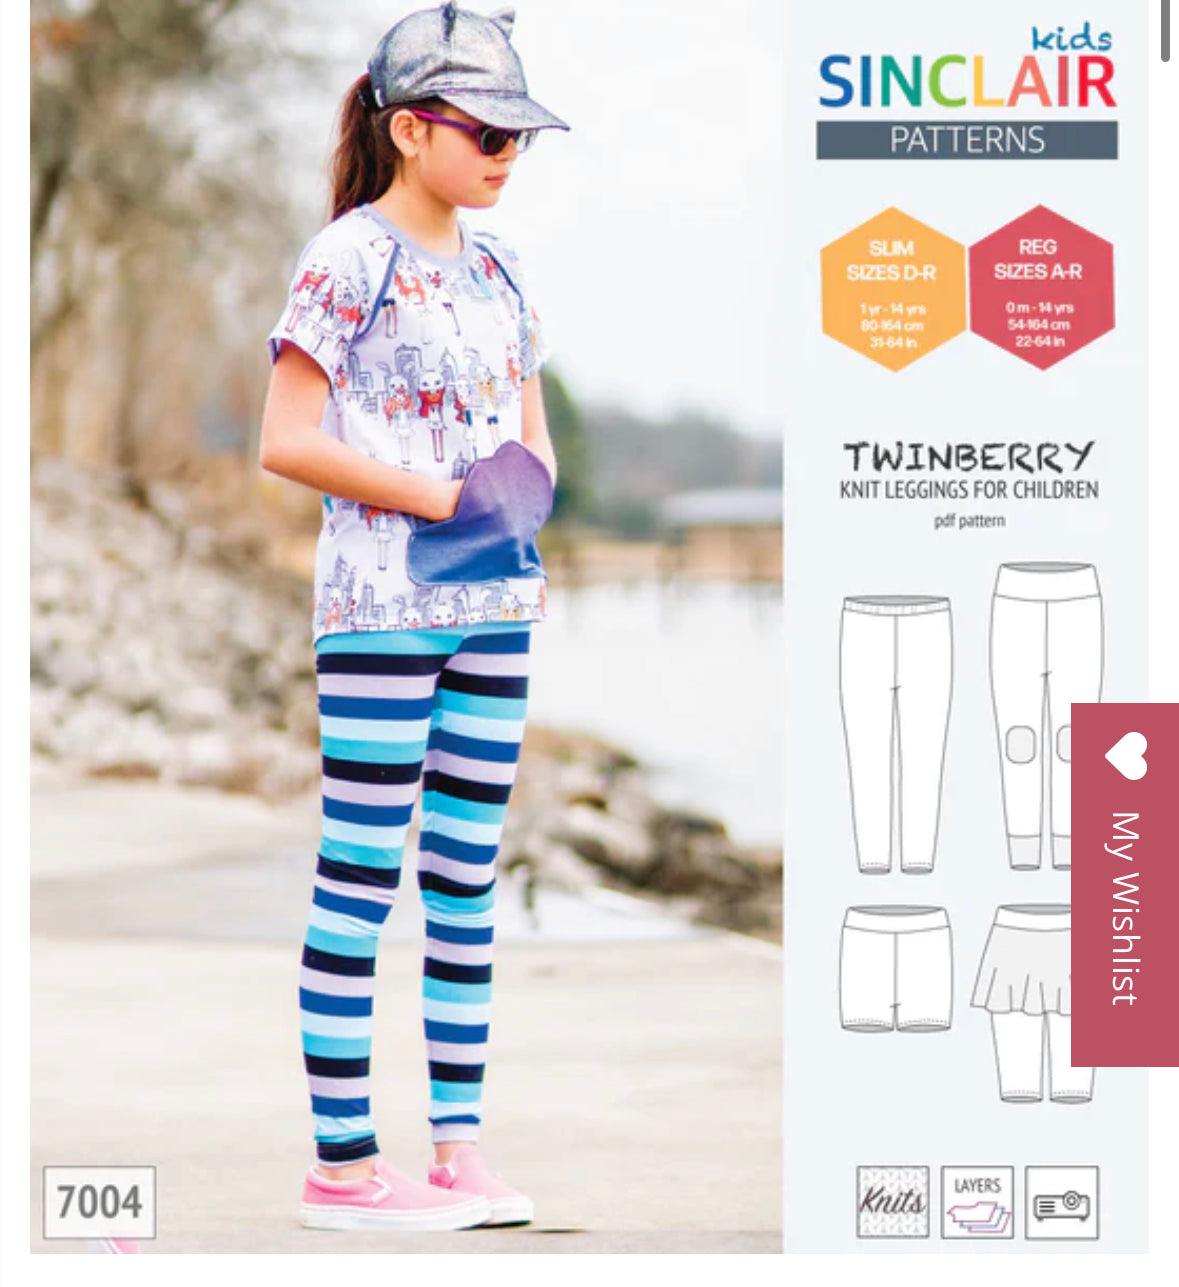 Twinberry Leggings for Children Sinclair Sewing Pattern